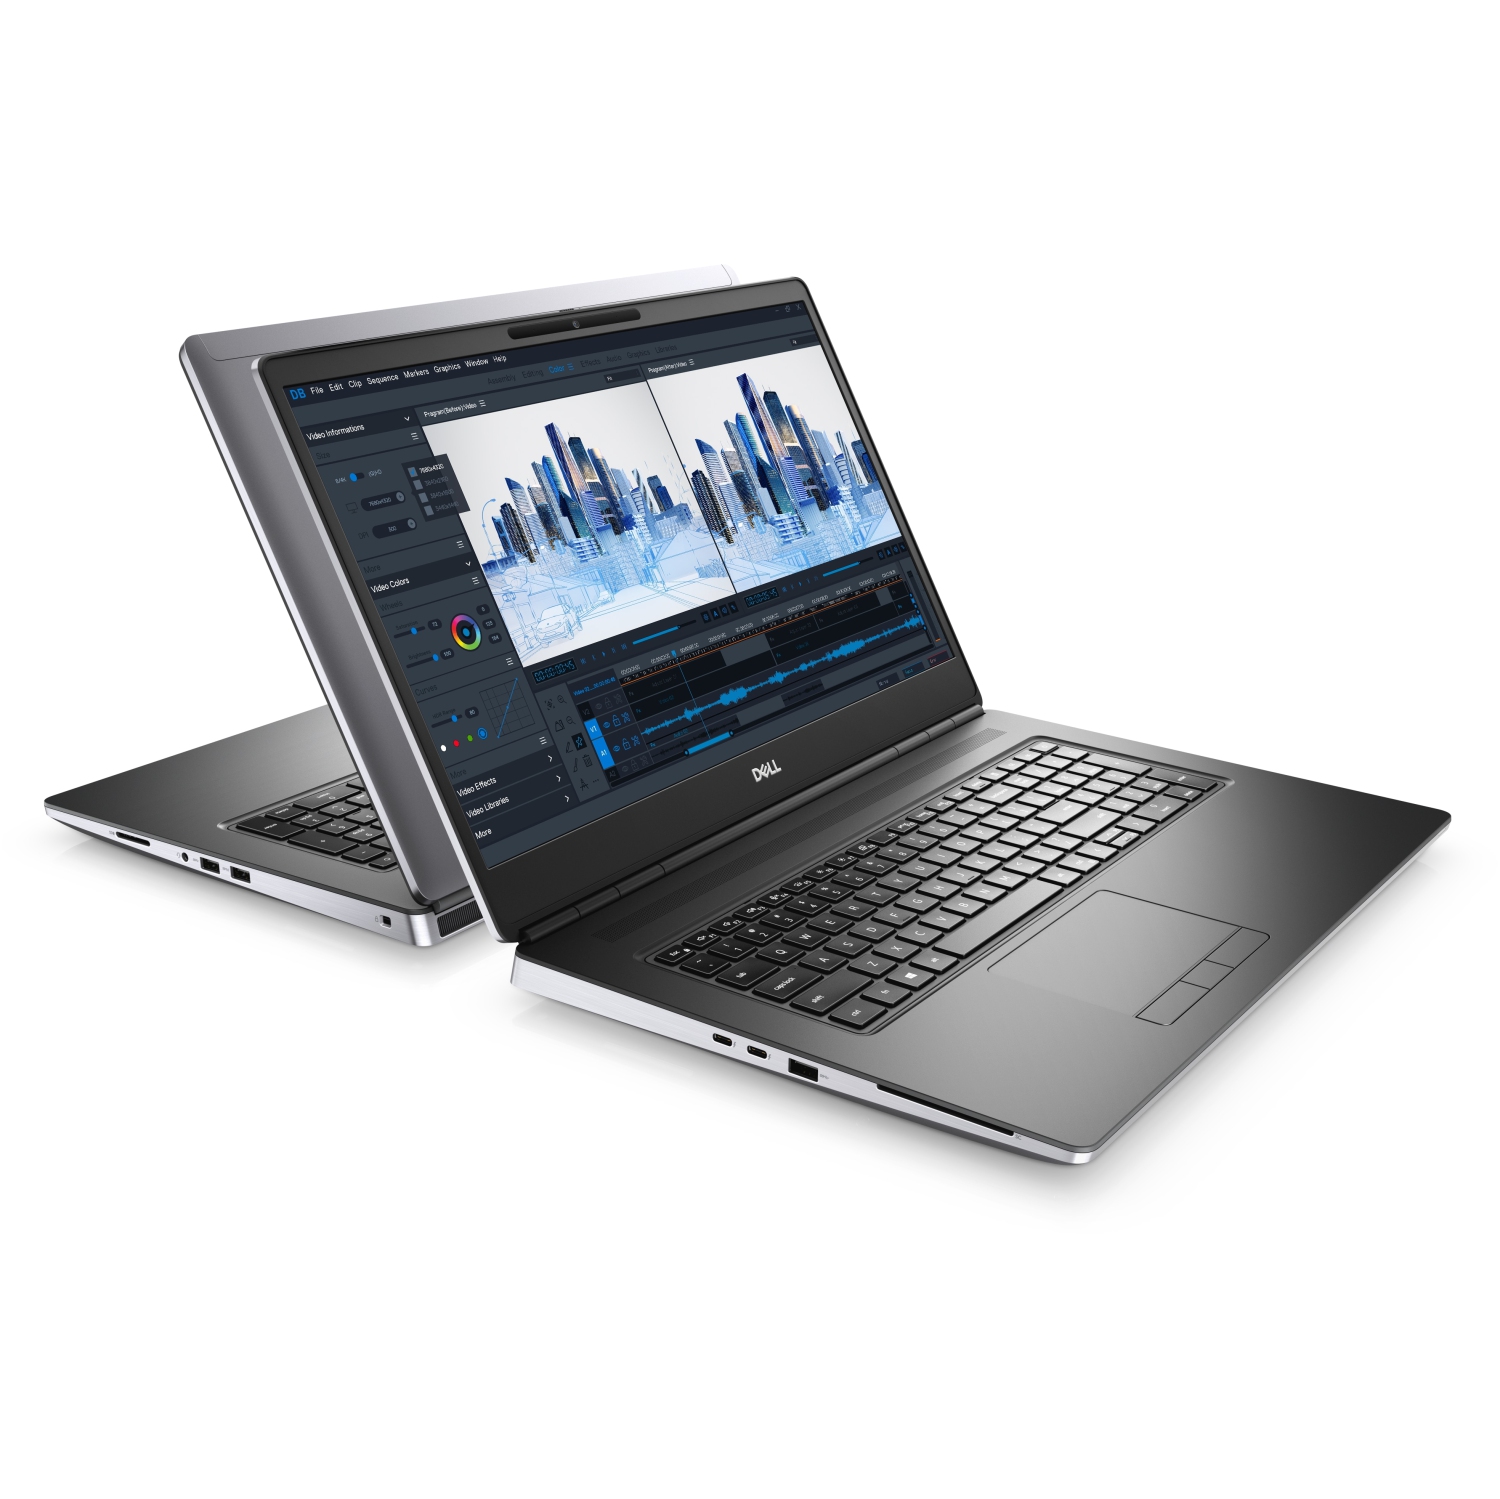 Refurbished (Excellent) - Dell Precision 7000 7760 Workstation Laptop (2021), 17.3" FHD, Core i5, 512GB SSD, 16GB RAM, 6 Cores @ 4.6 GHz, 11th Gen CPU Certified